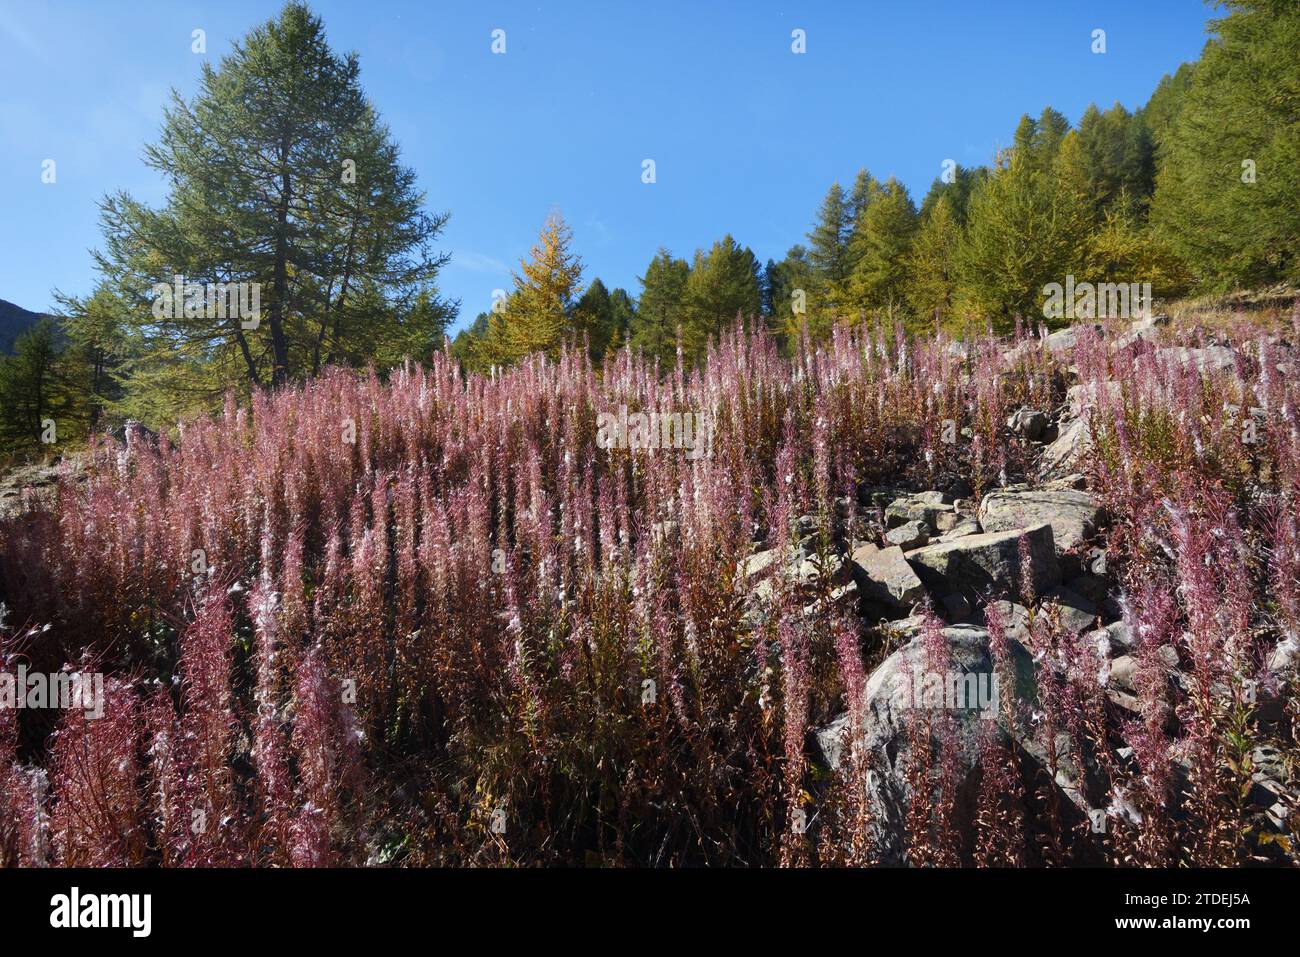 Masses of Seeding Rosebay Willowherb or Fireweed, Chamaenerion angustifolium, Showing Seed Capsules & Cotton Wool Seeds on Hillside in French Alps Stock Photo